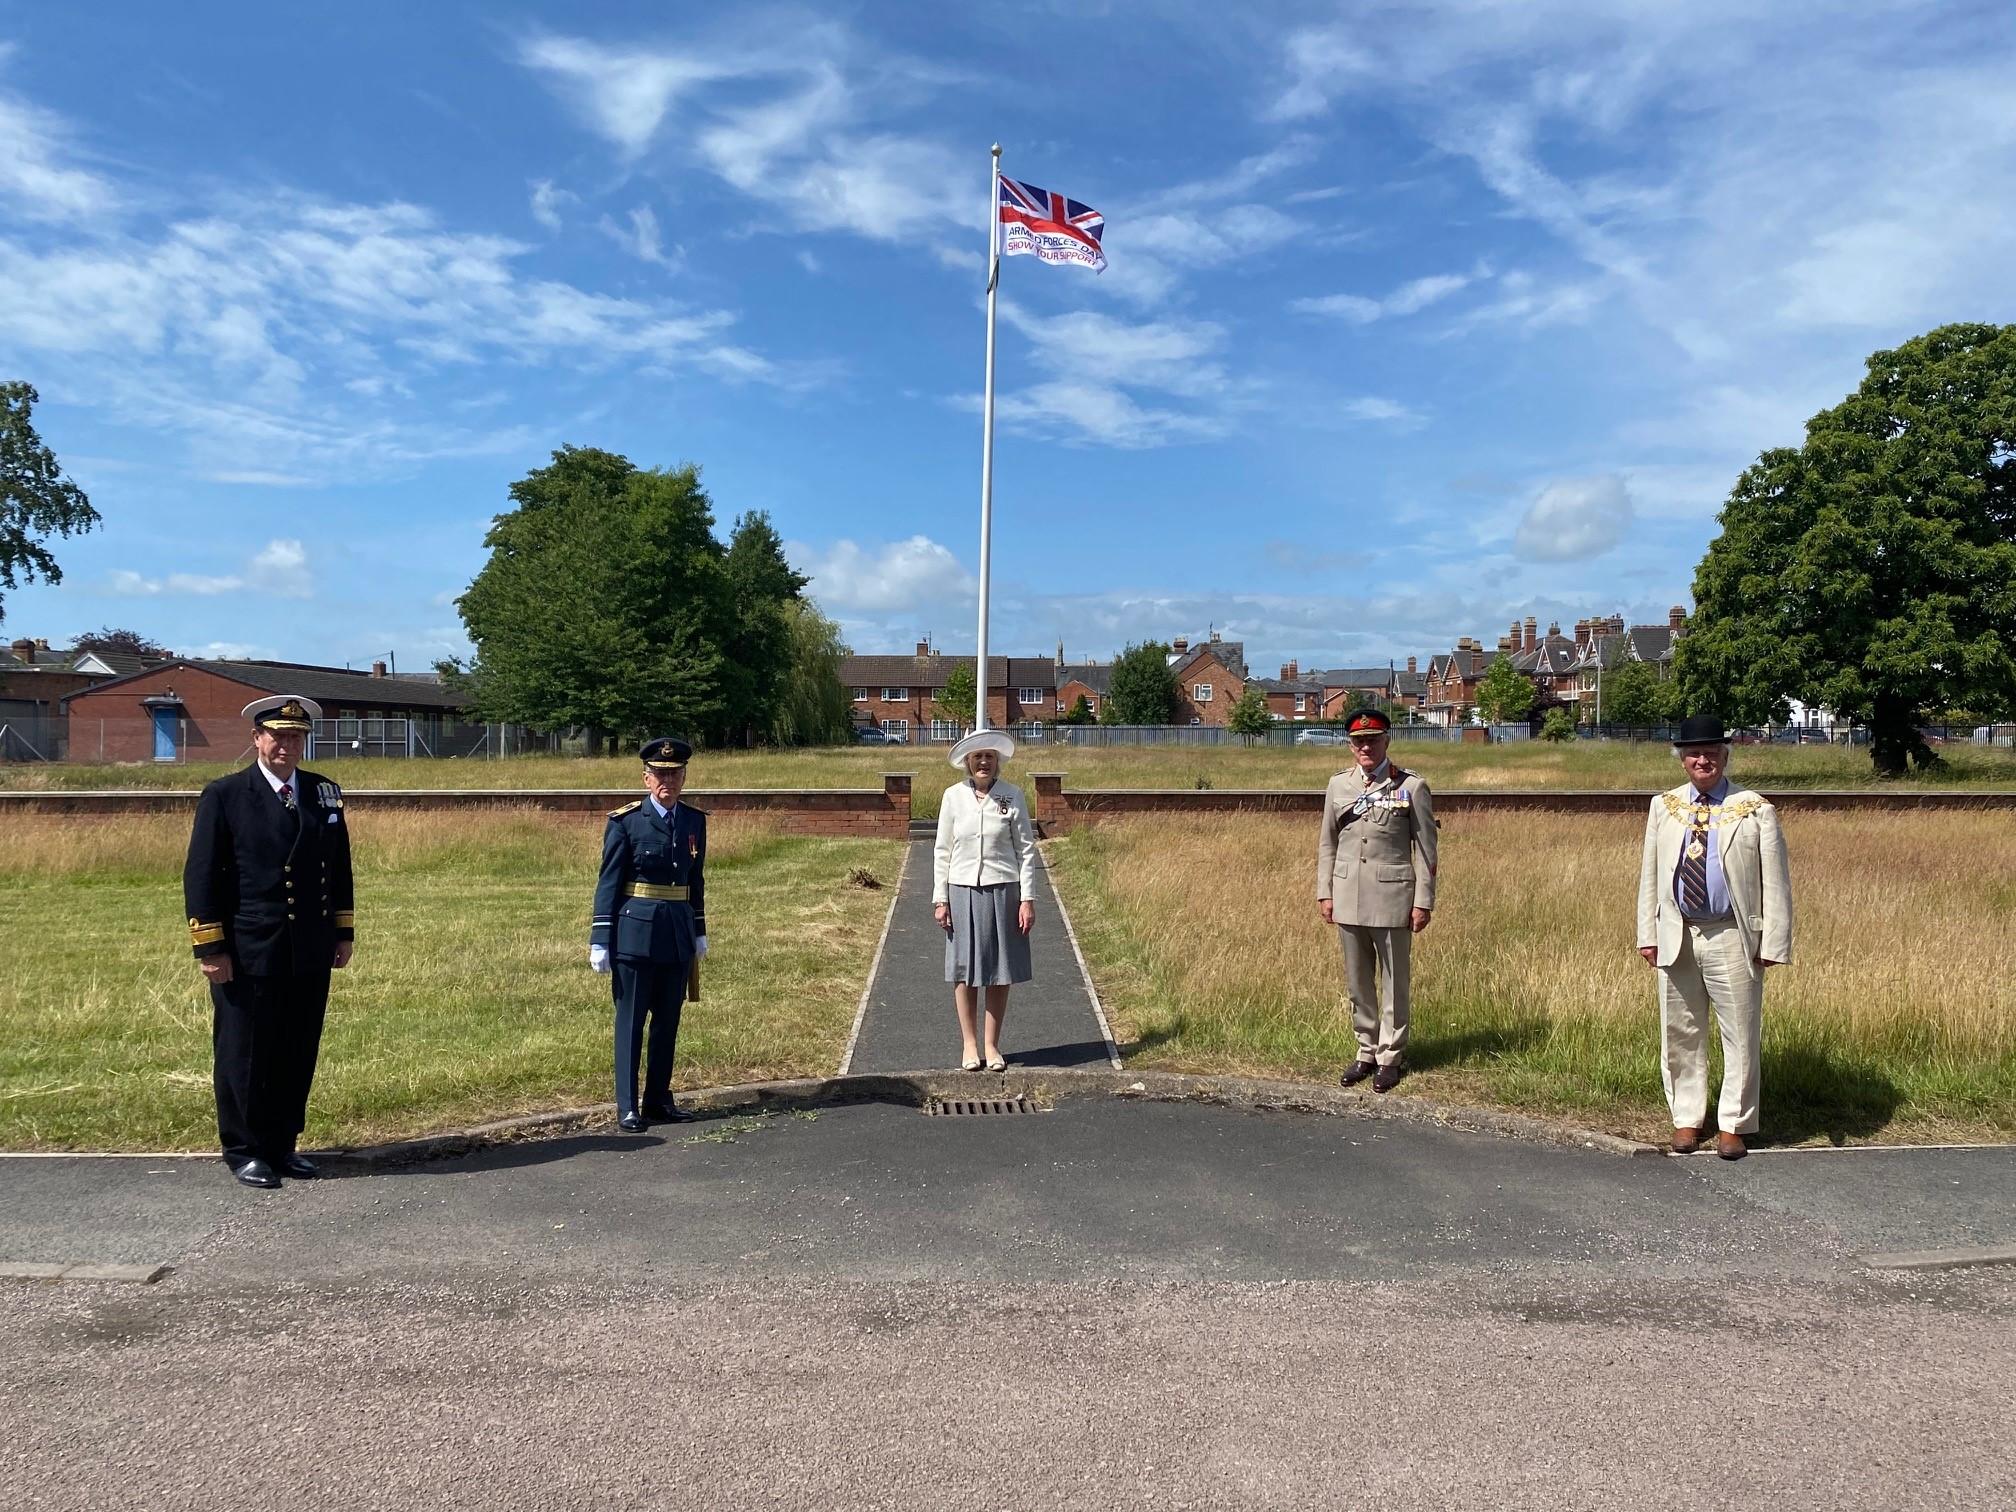 A flay is raised for Armed forces day at Sulva barracks in Hereford pictures with the flag at full mast Rear Admiral Philip Wilcocks, Air Vice-Marshal Mike Smart, Her Majesty's Lord Lieutenant of Herefordshire The Dowager Countess of Darnley, Major-General Arthur Denaro, Councillor Sebastian Bowen